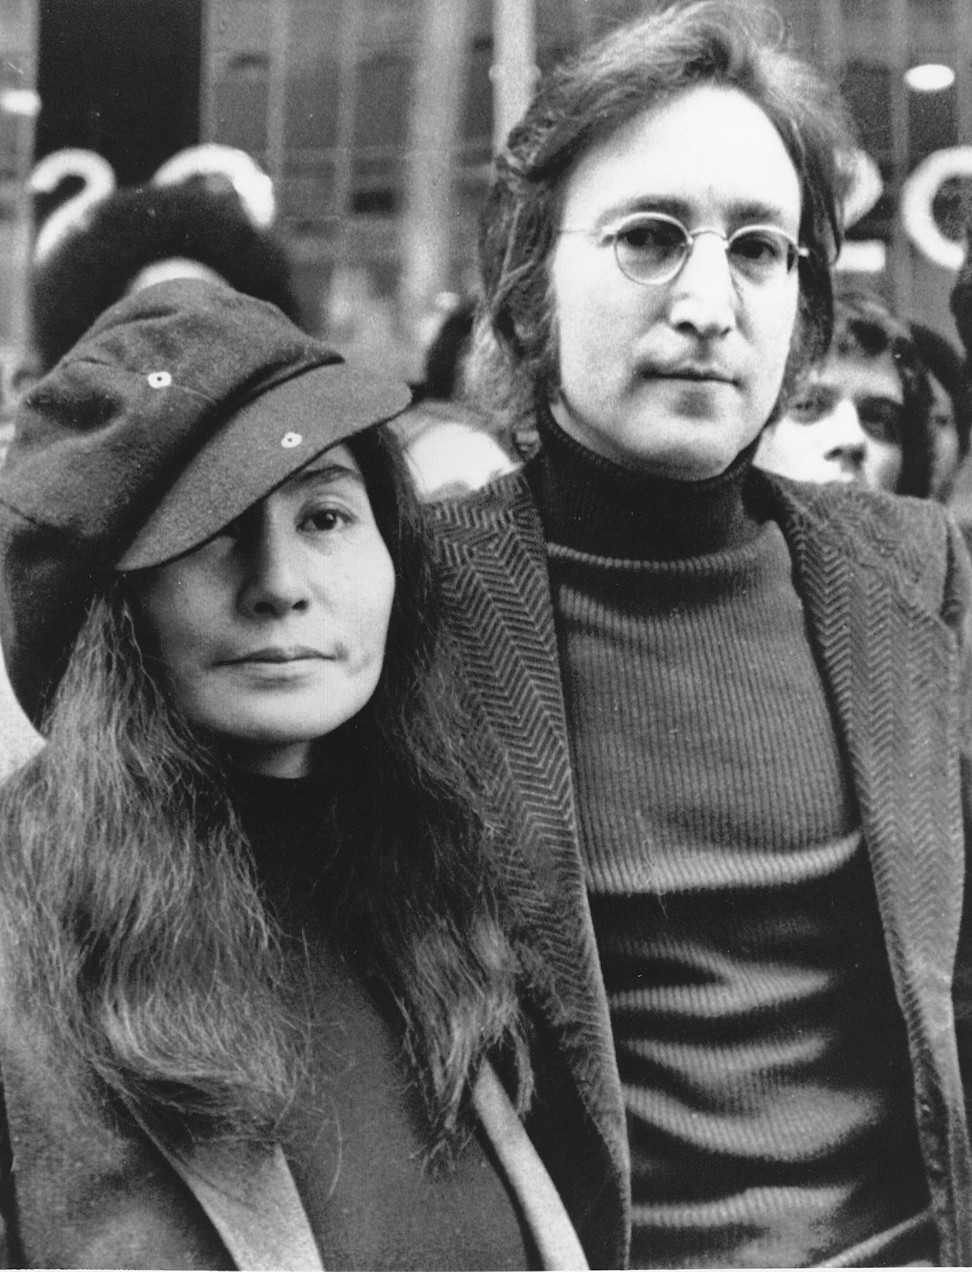 John Lennon and Yoko Ono in 1972. Round glasses were part of his signature style. File photo: AP